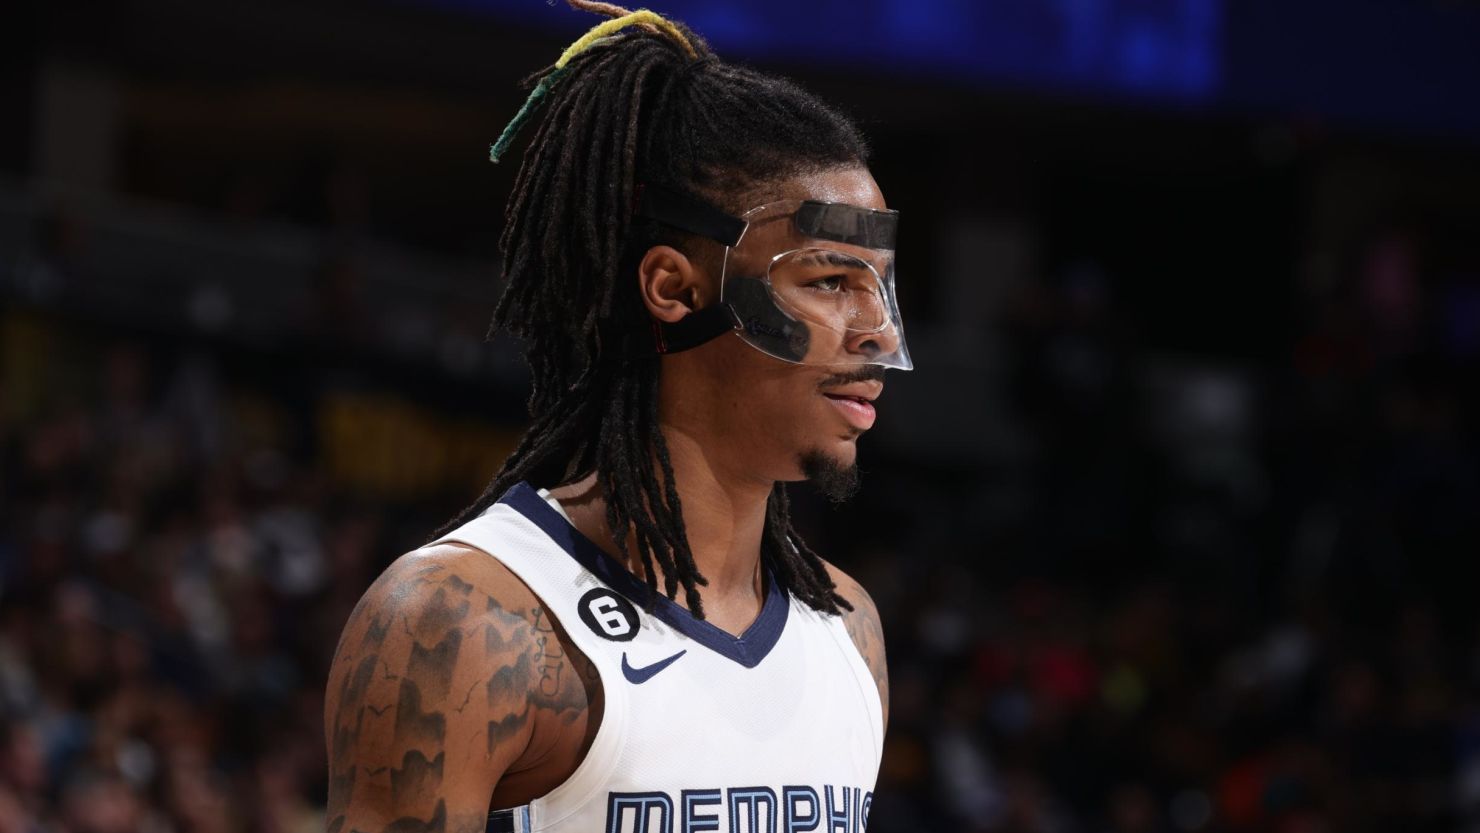 Ja Morant looks on during the Memphis Grizzlies' game against the Denver Nuggets on March 3.